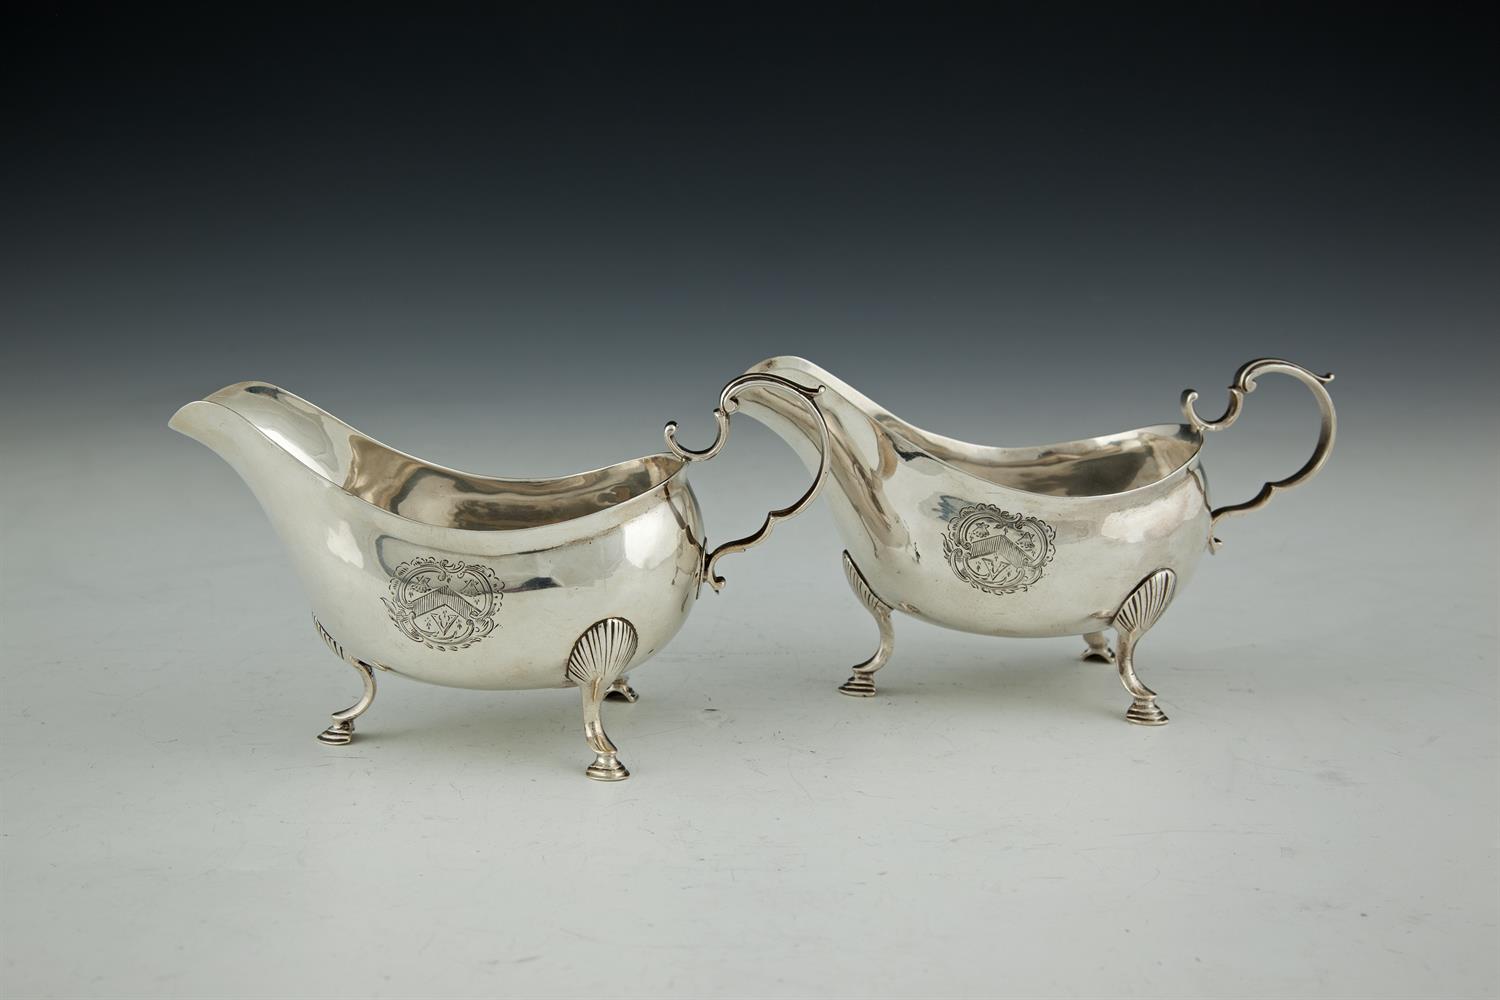 A PAIR OF IRISH GEORGE III SILVER SAUCEBOATS, by Matthew West of Dublin, c.1778, each of plain form,